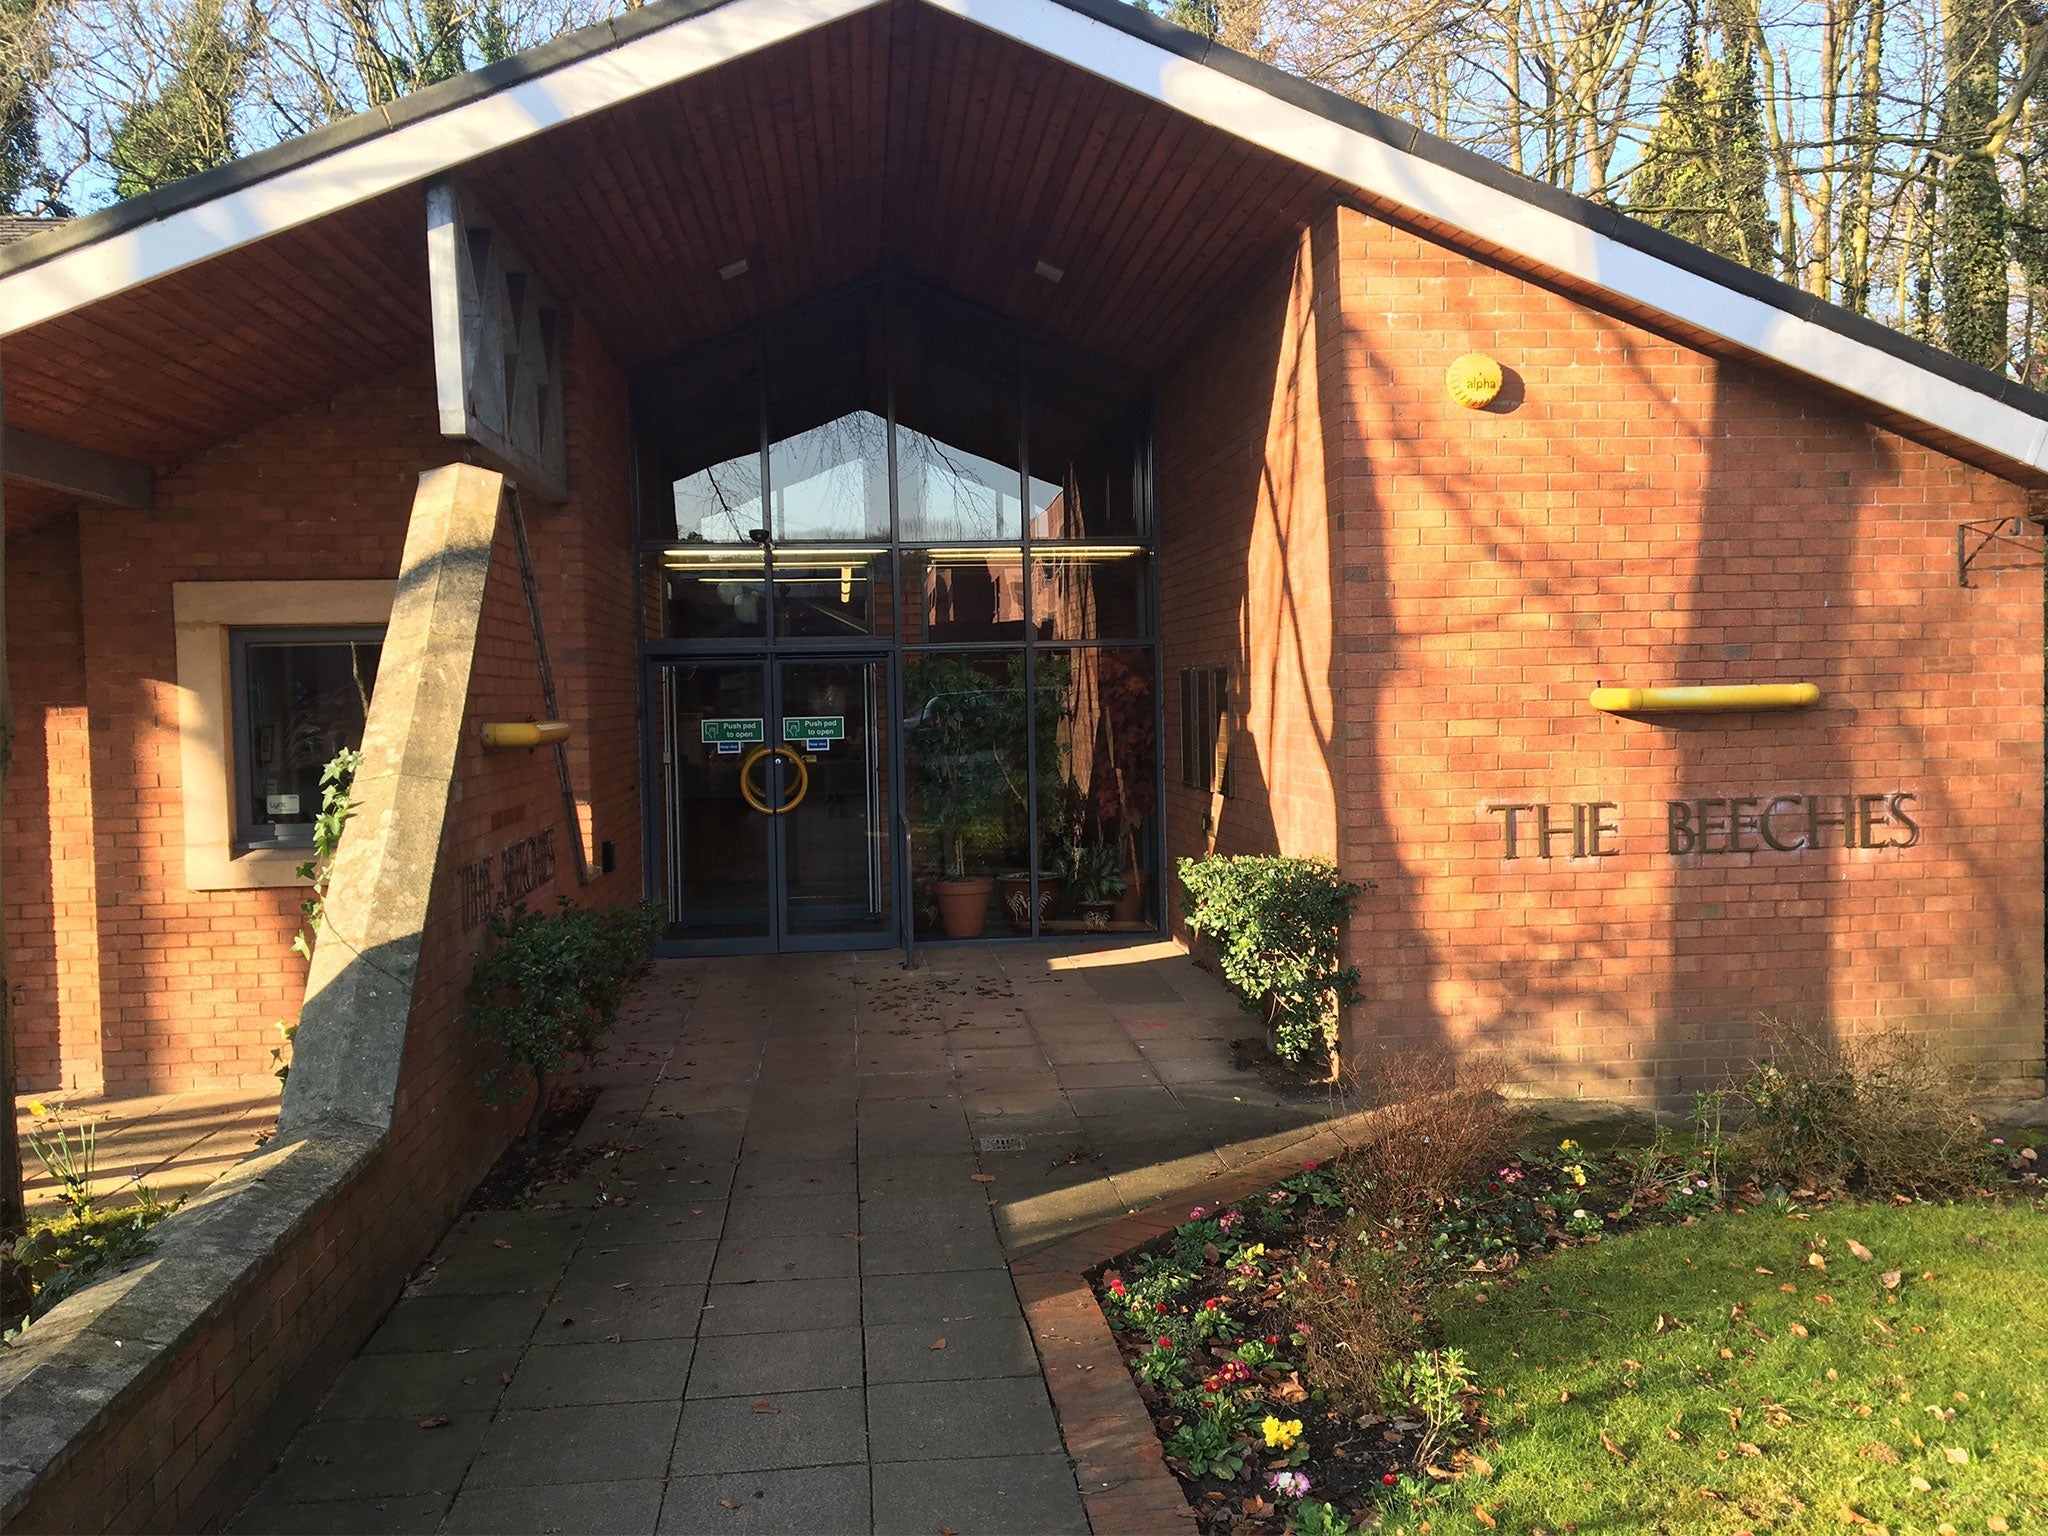 The Beeches private health centre in Cheadle, Greater Manchester, has become the first specialist medical cannabis treatment clinic in the UK